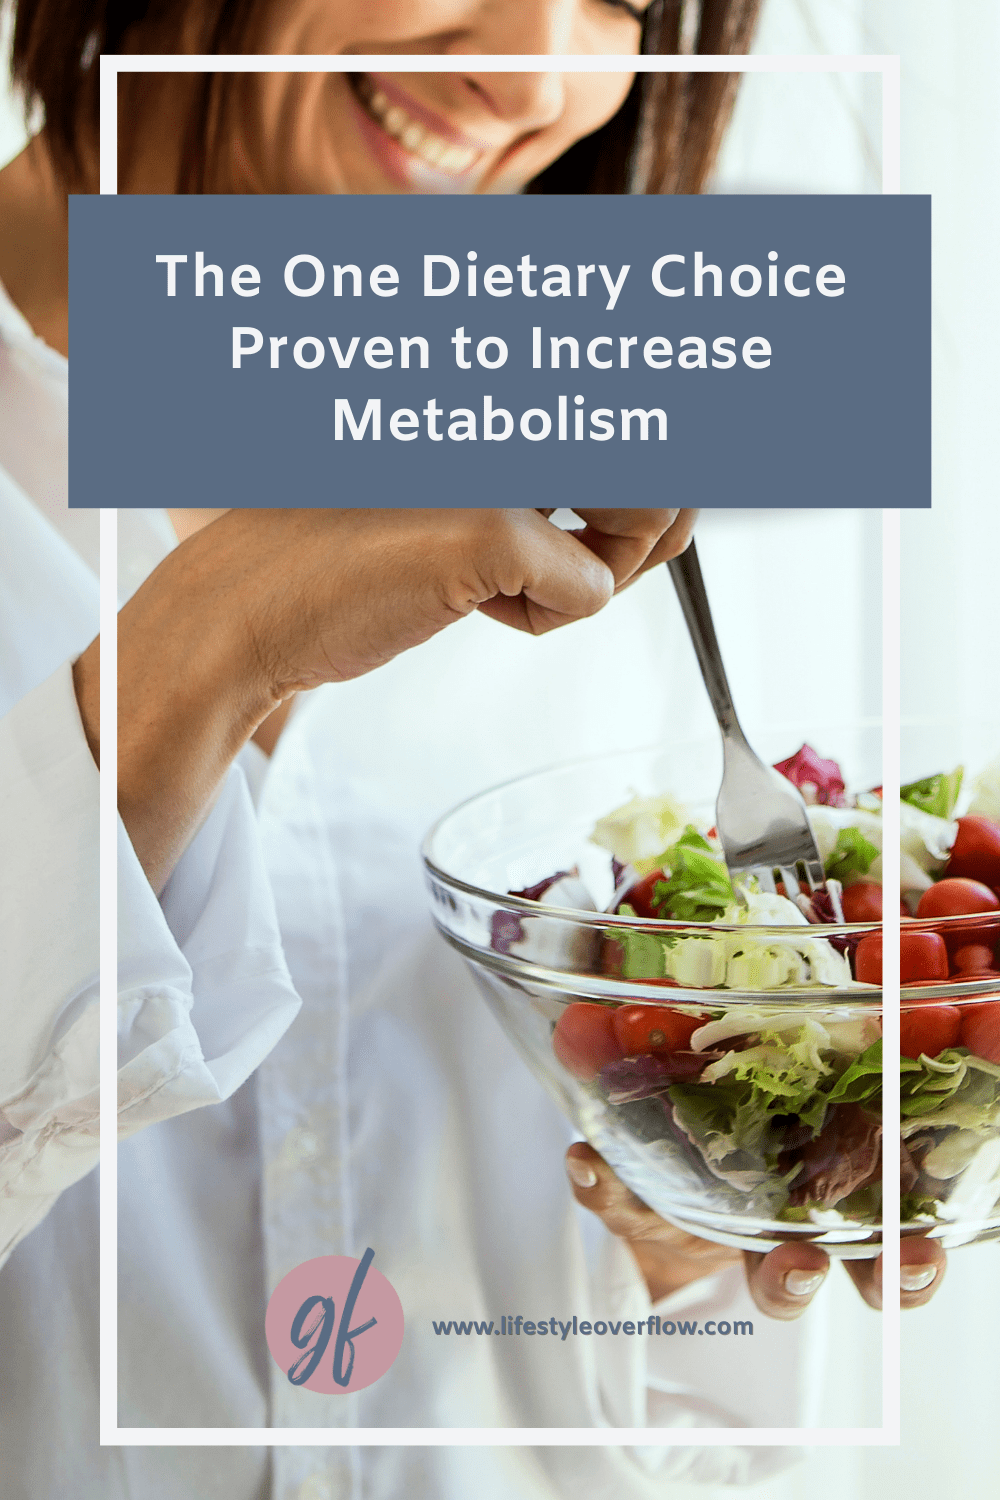 graphic with a photo of a woman eating a salad | blue box with text: The One Dietary Choice Proven to Increase Metabolism | logo with gf and lifestyleoverflow.com 